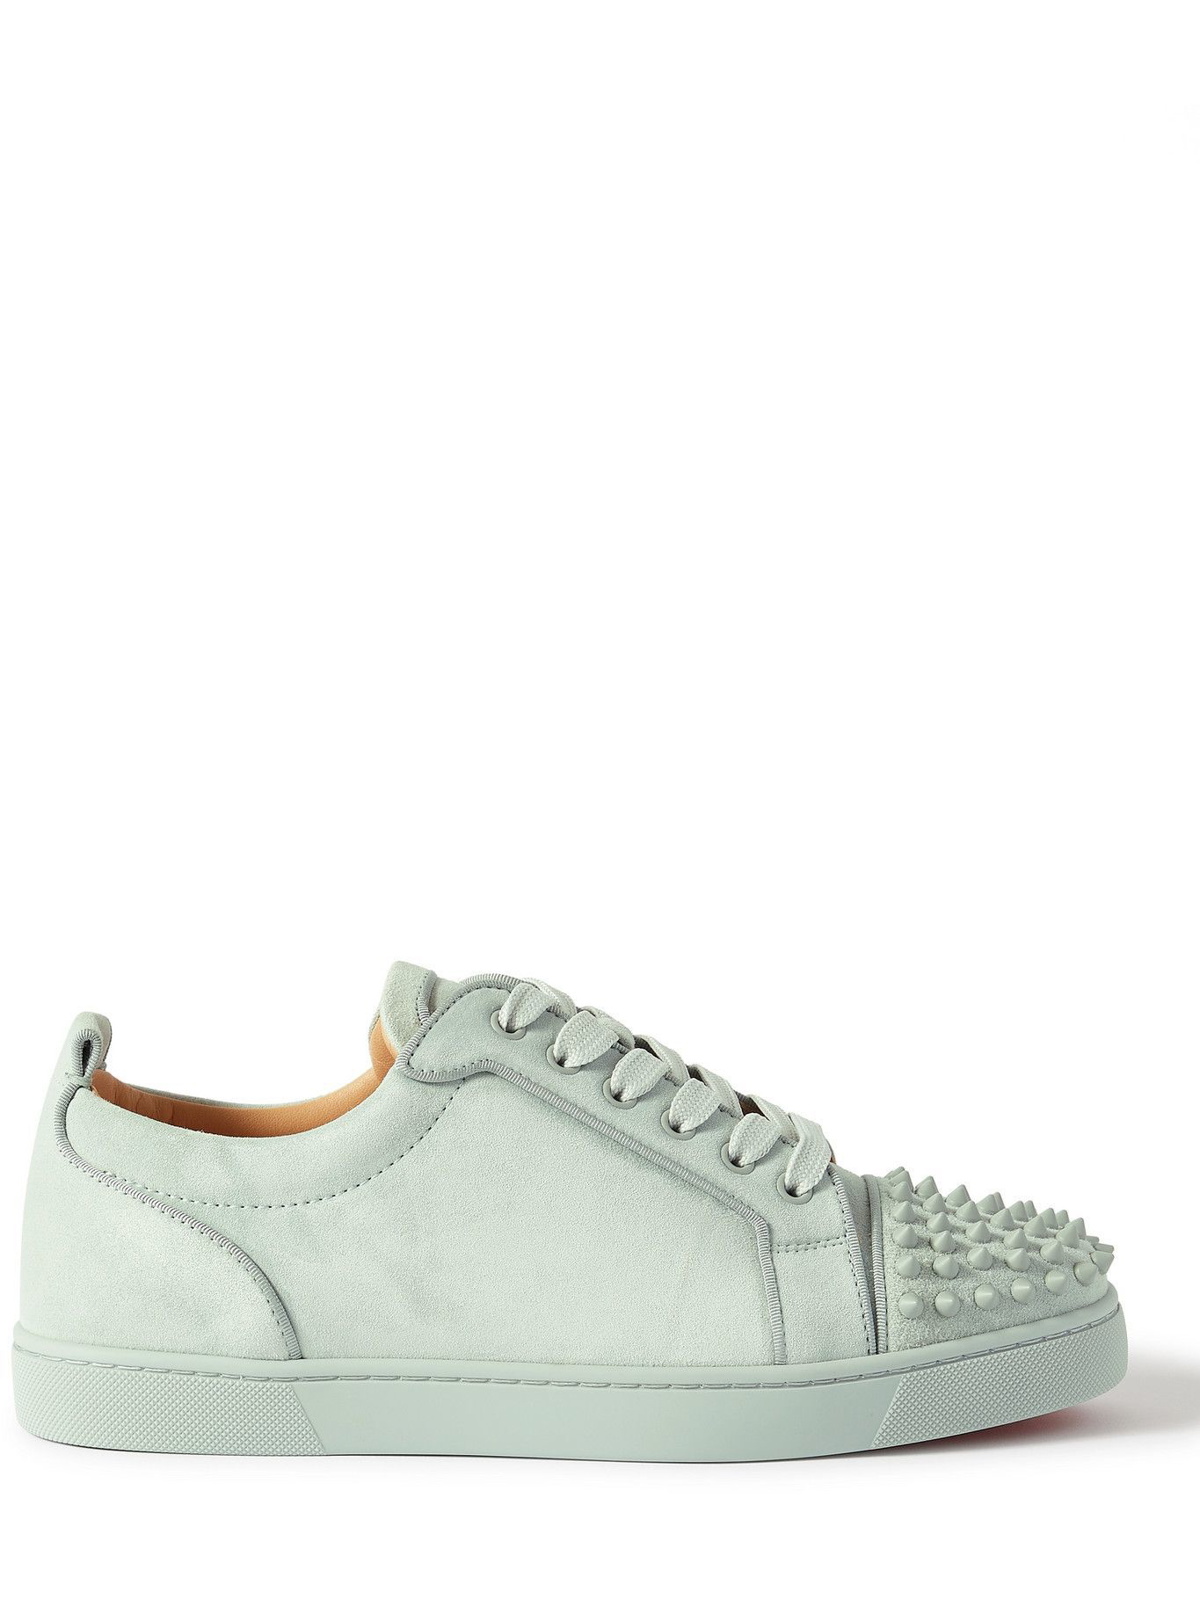 Christian Louboutin suede sneakers